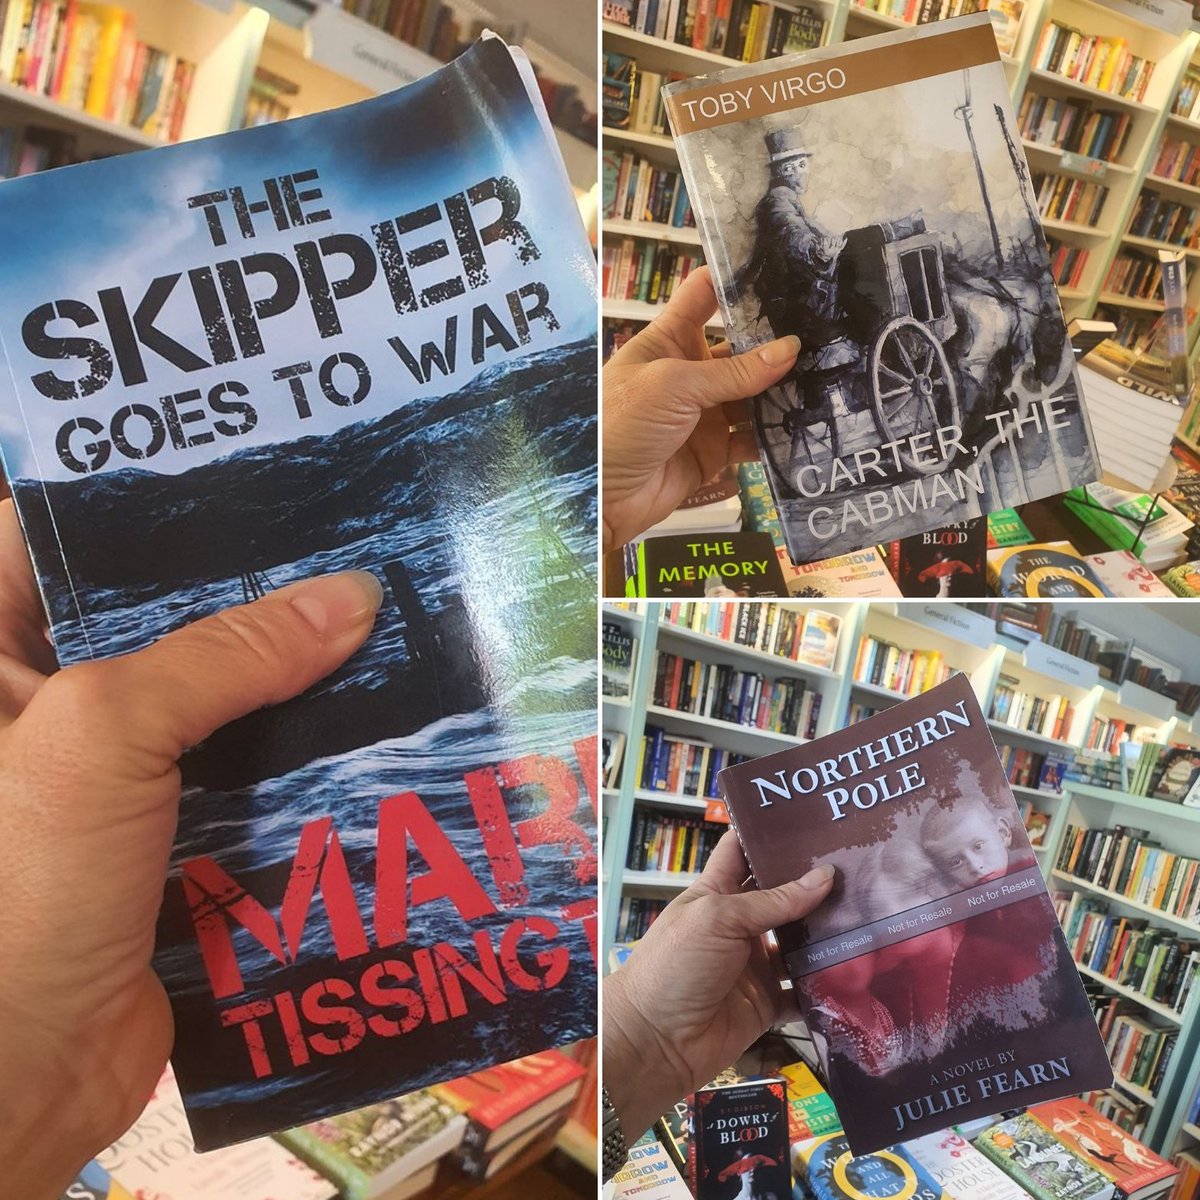 Tomorrow sees the 2nd Saturday of signings from our New Writers' Event. We welcome three authors of historical novels @JuliefearnNP23, Mark Tissington and Toby Virgo. These are all cracking novels! Pop over to instagram.com/kempsmalton/ to find mini reviews from our staff.